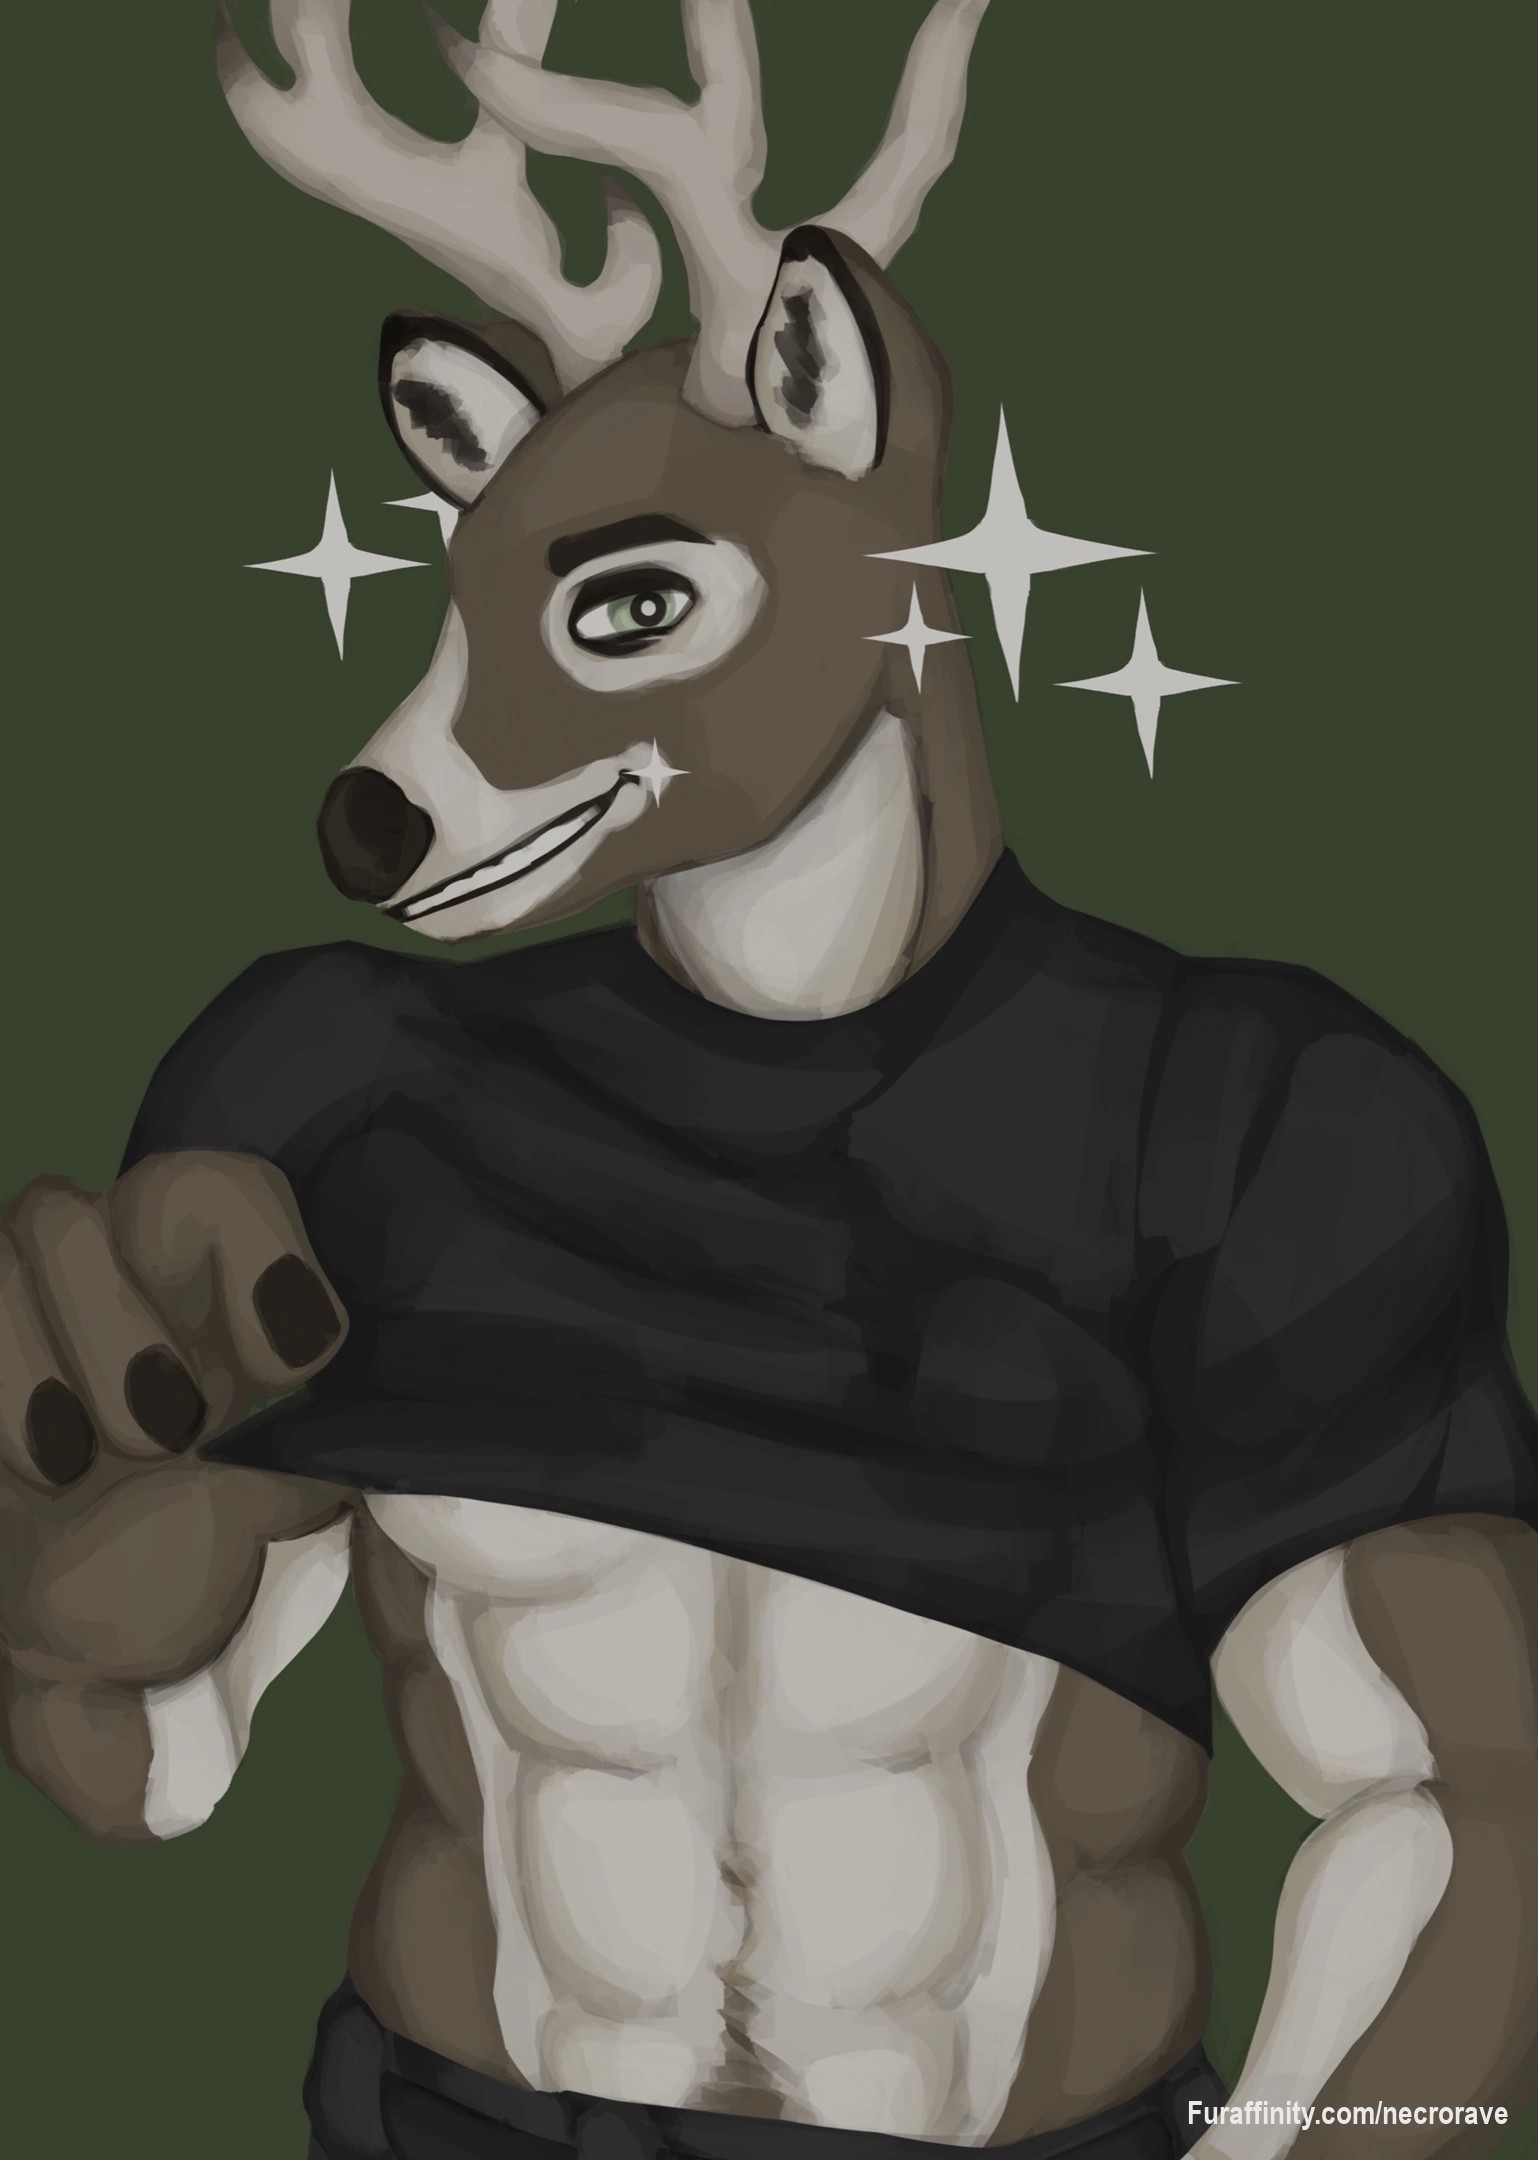 My first furry commission that got me interested in the community and trying my hand in furry art 🦌